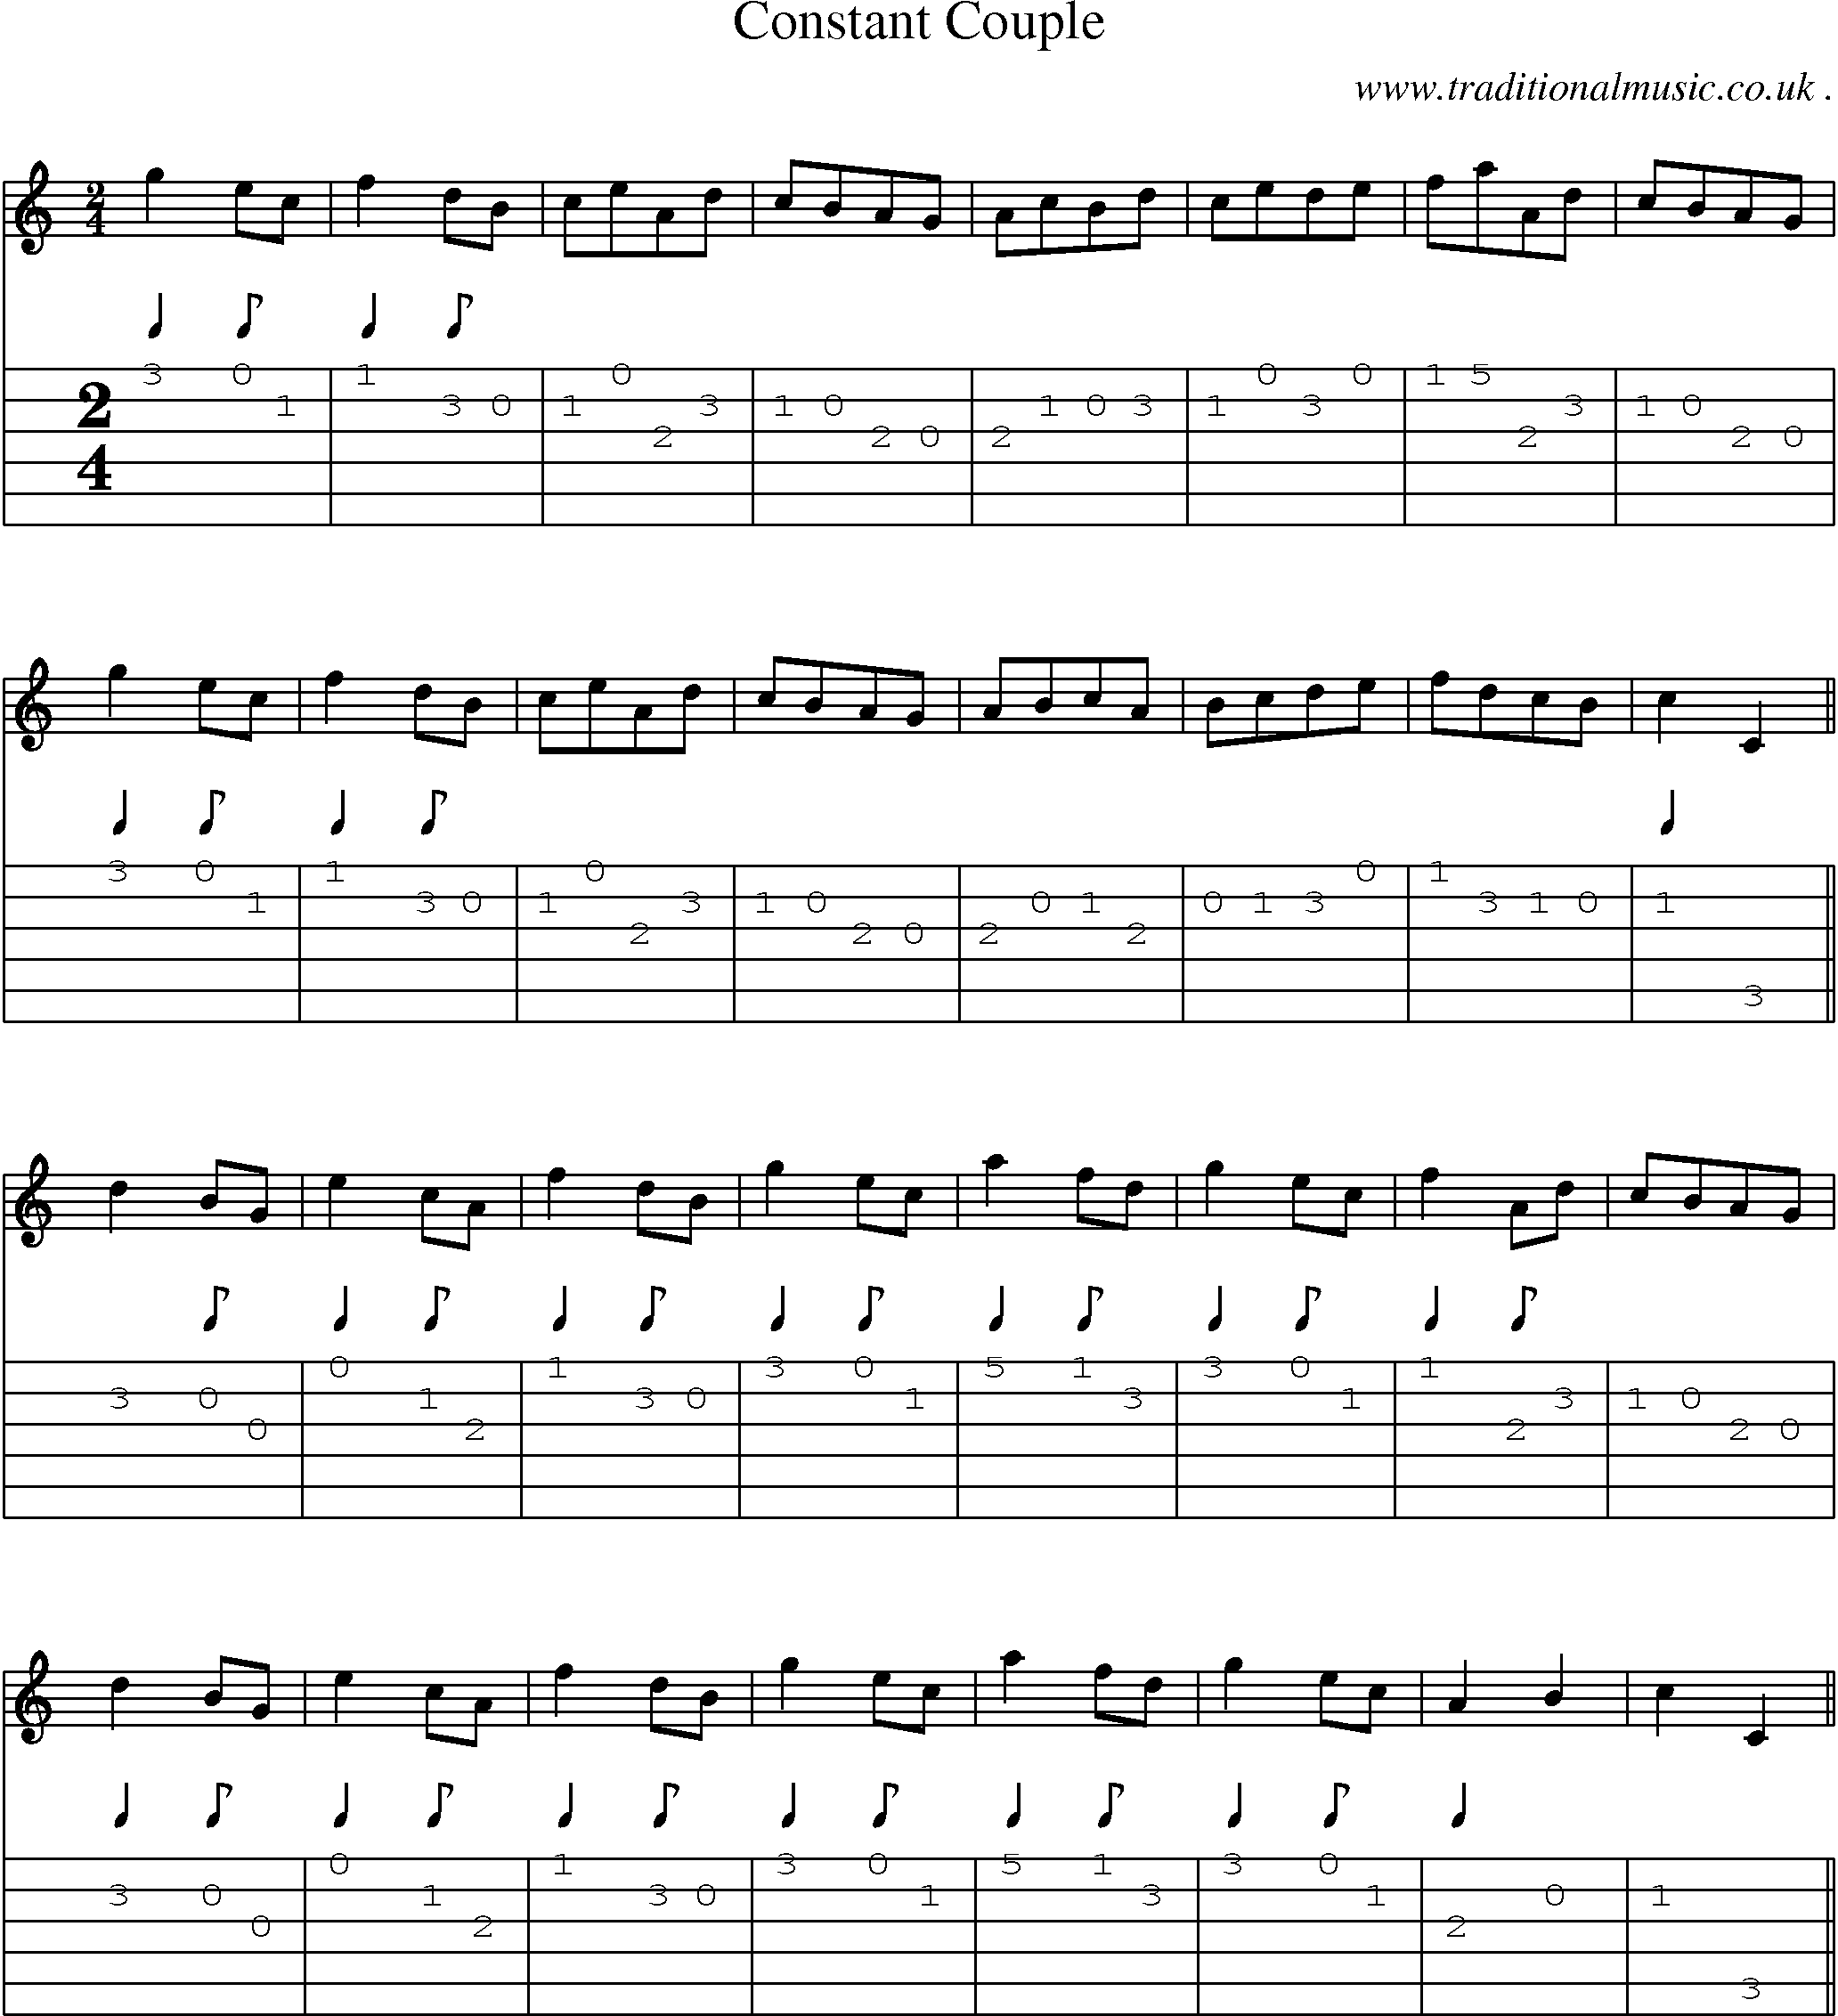 Sheet-Music and Guitar Tabs for Constant Couple